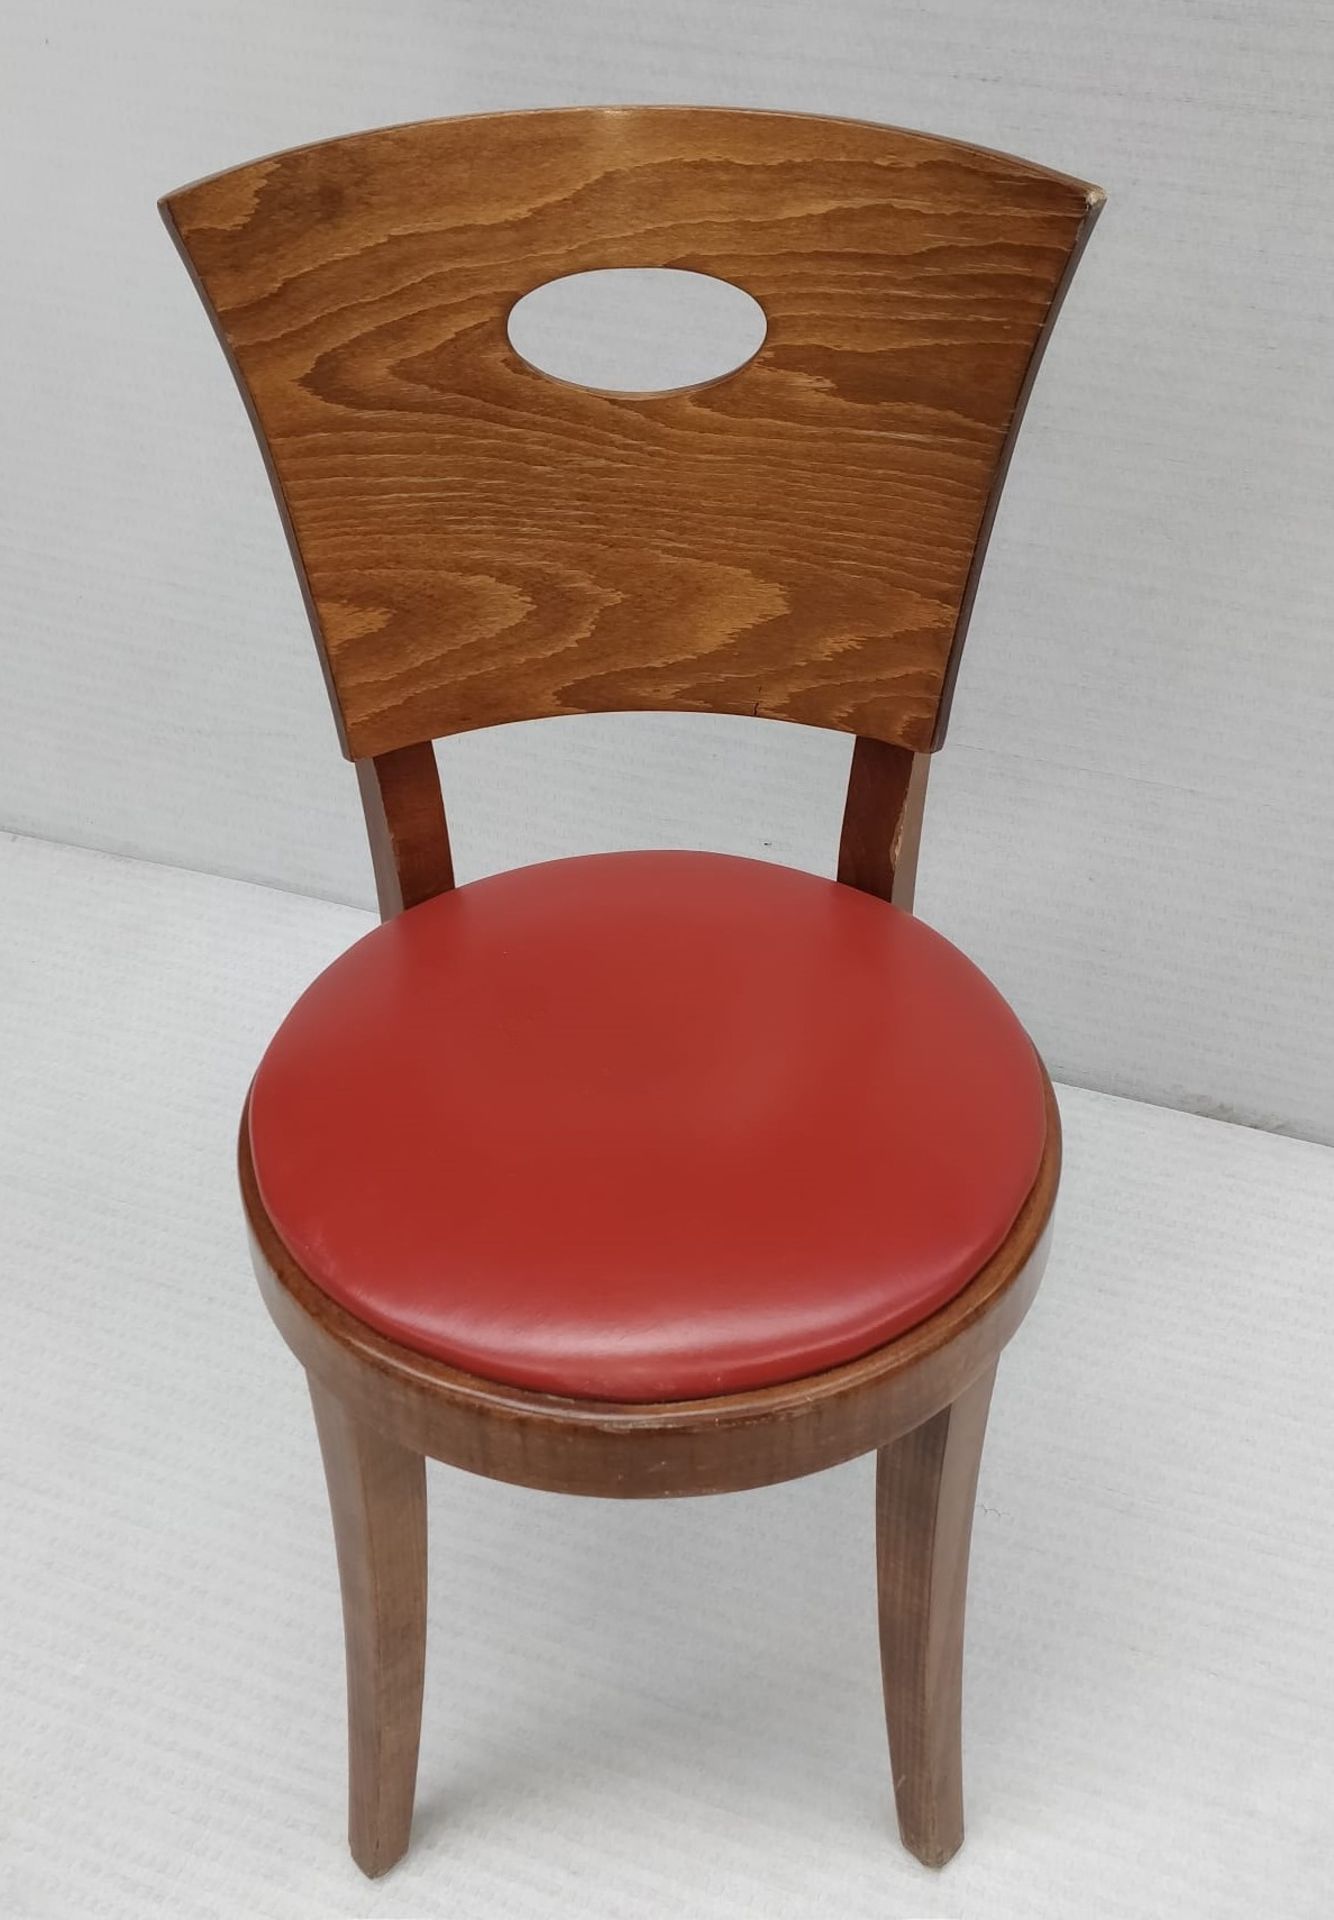 24 x Contemporary Restaurant Dining Chairs With Dark Wood Finish and Red Leather Seat Pads - - Image 6 of 6